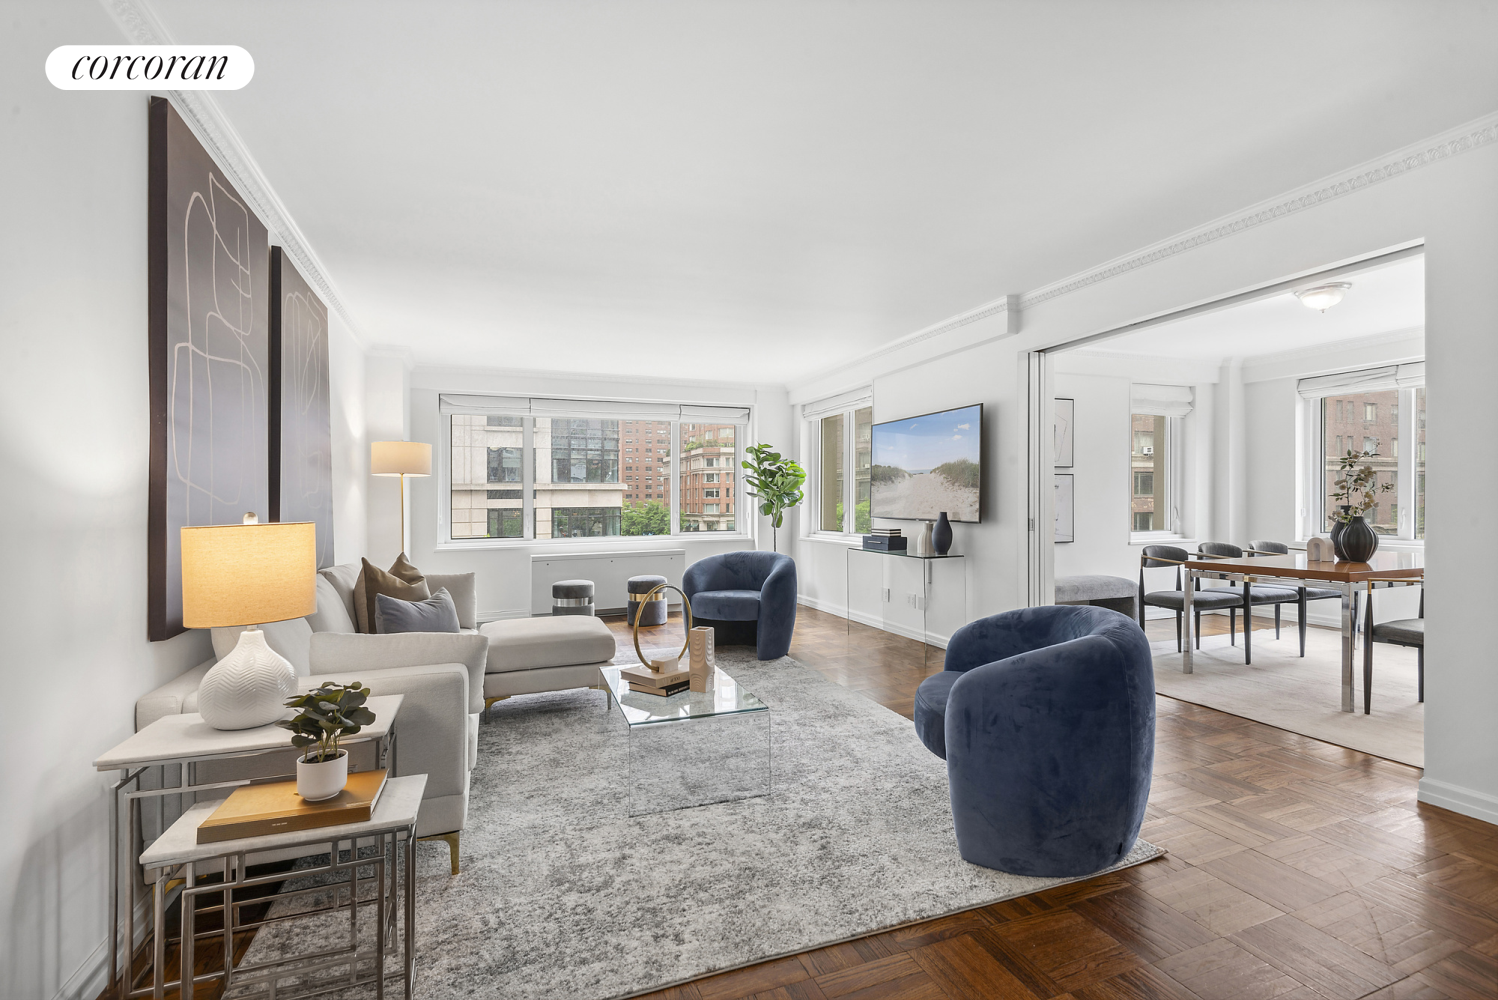 201 East 79th Street 4D, Yorkville, Upper East Side, NYC - 2 Bedrooms  
2 Bathrooms  
5 Rooms - 